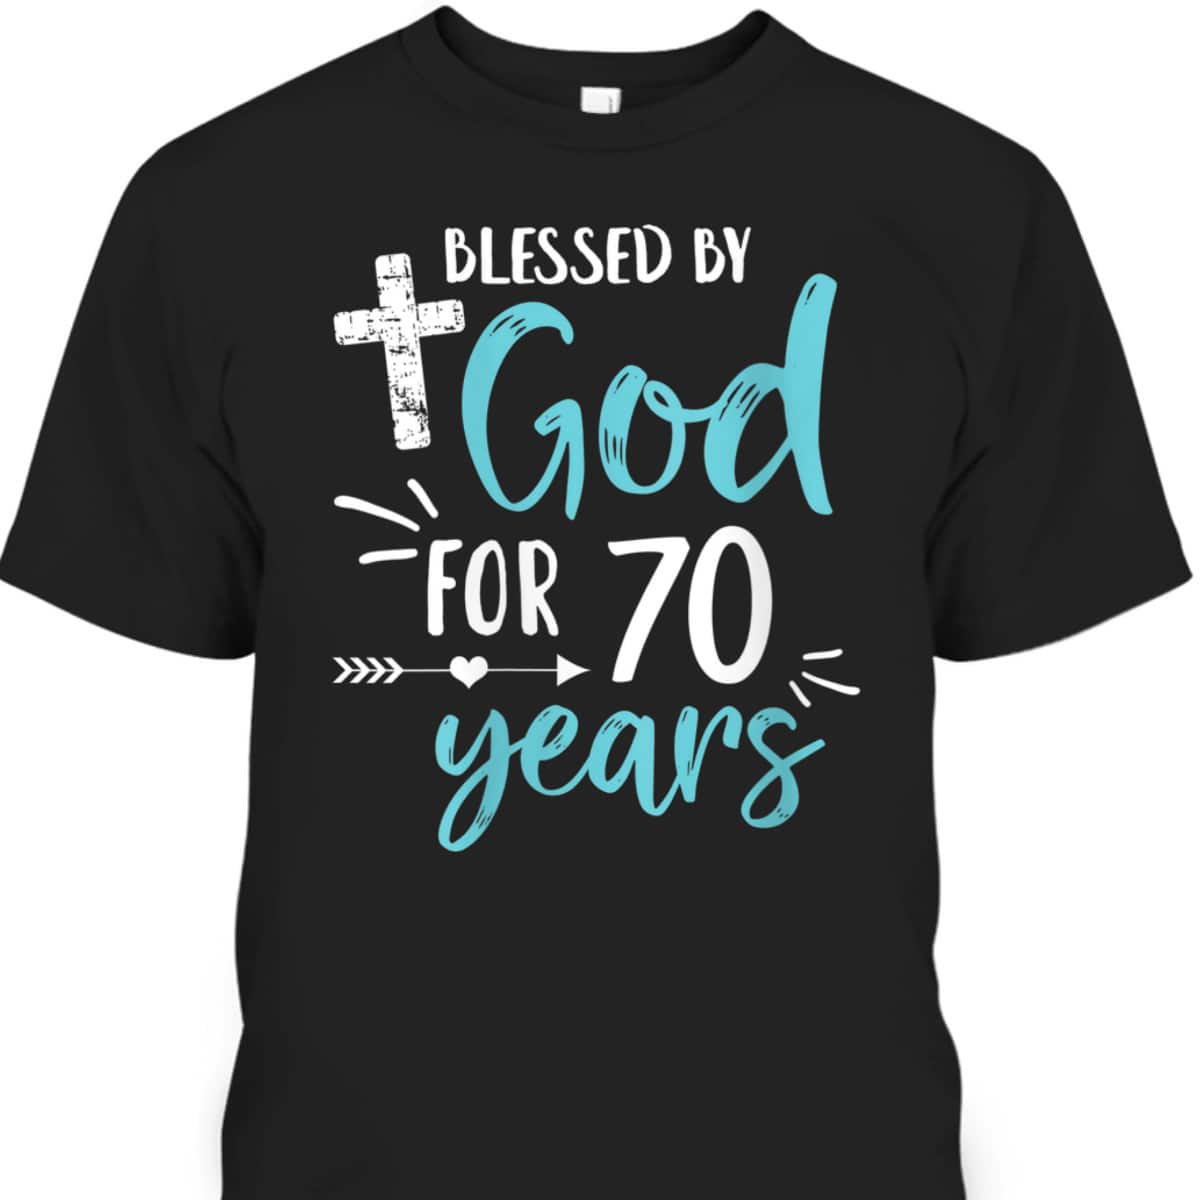 Blessed By God For 70 Years Cute Christian Religious Birthday T-Shirt